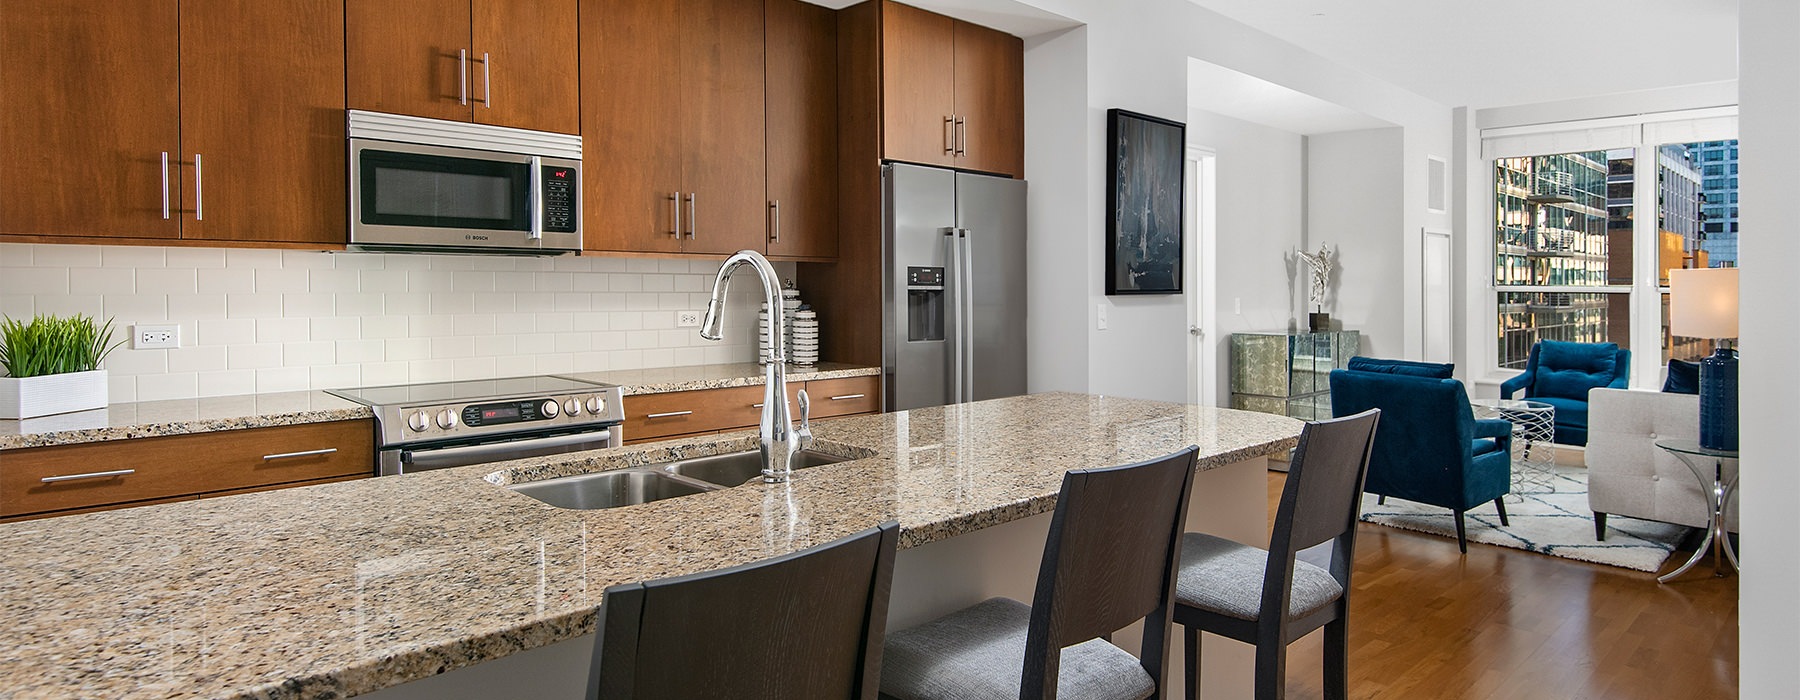 High-end stainless steel appliances and granite countertops